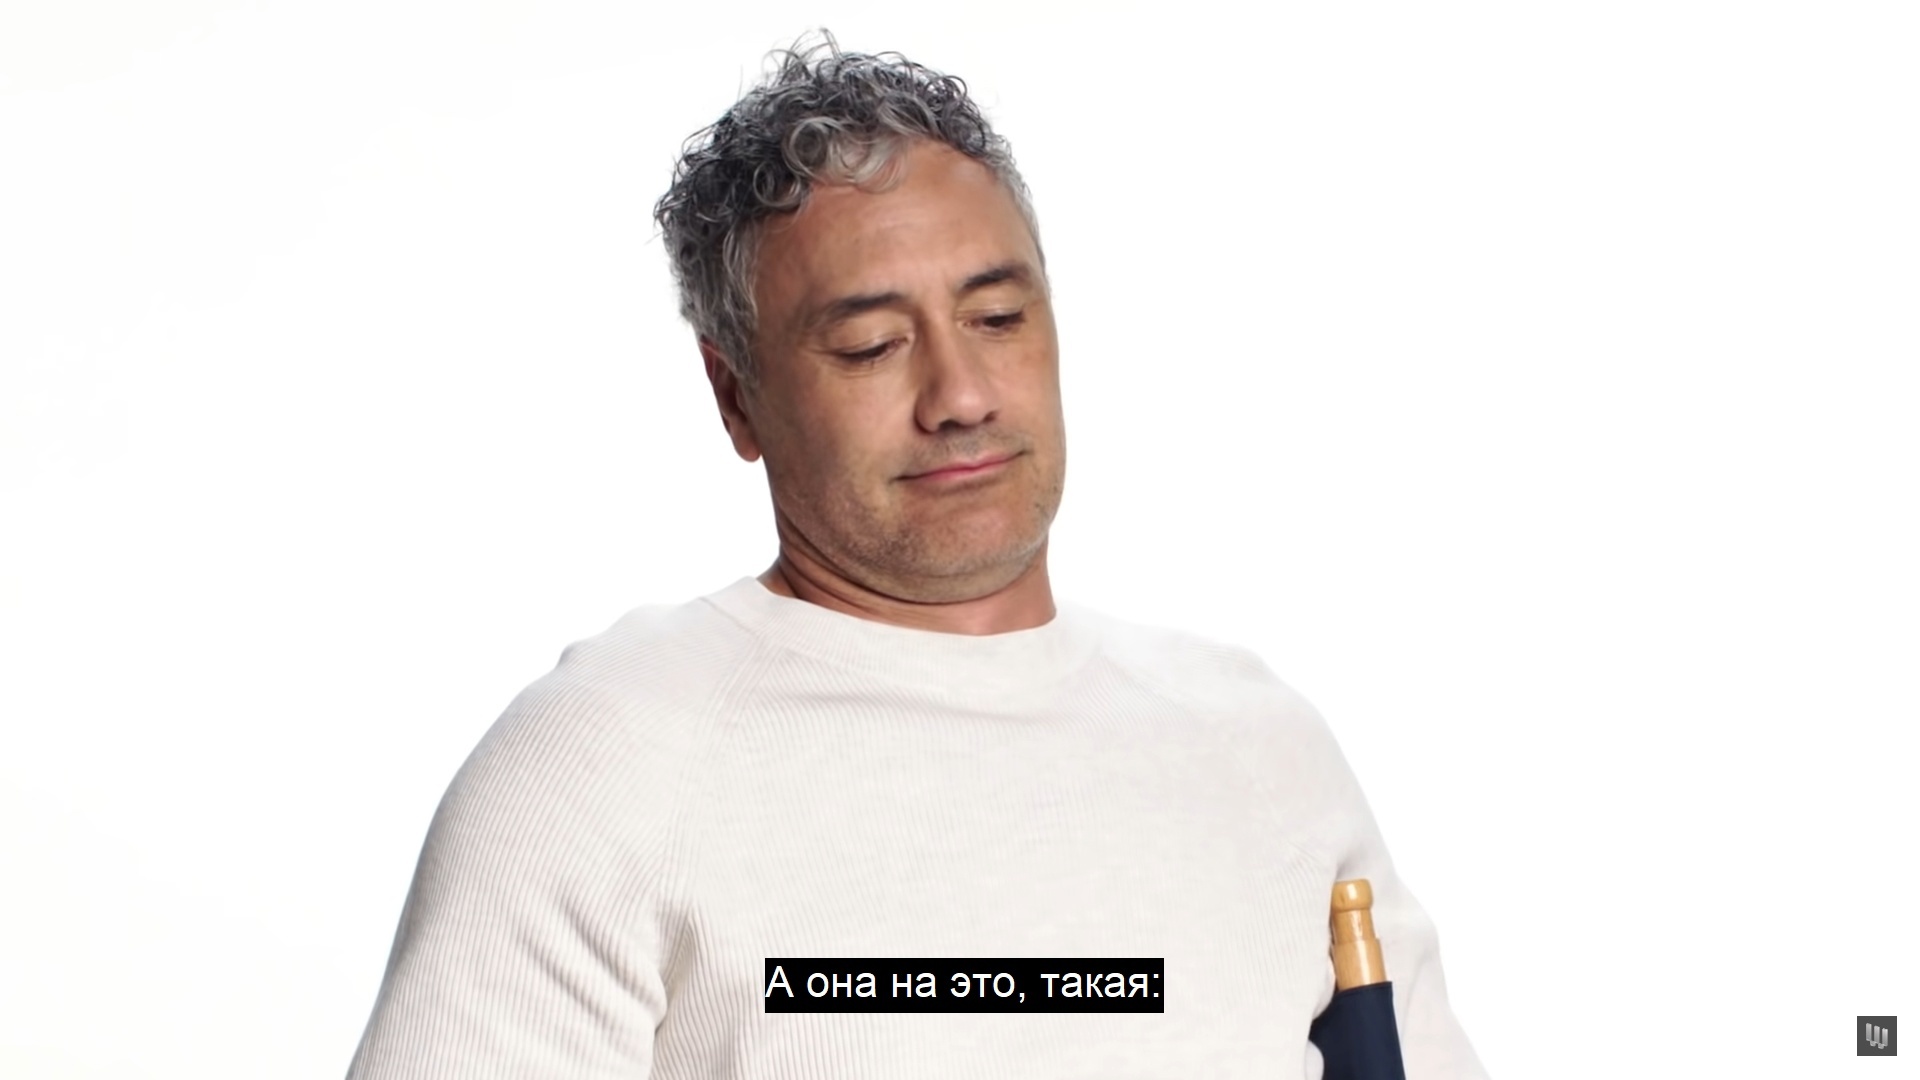 This is how memes are made - Taika Waititi, Cate Blanchett, Actors and actresses, Celebrities, Storyboard, Interview, Memes, Thor, Movies, From the network, Humor, Longpost